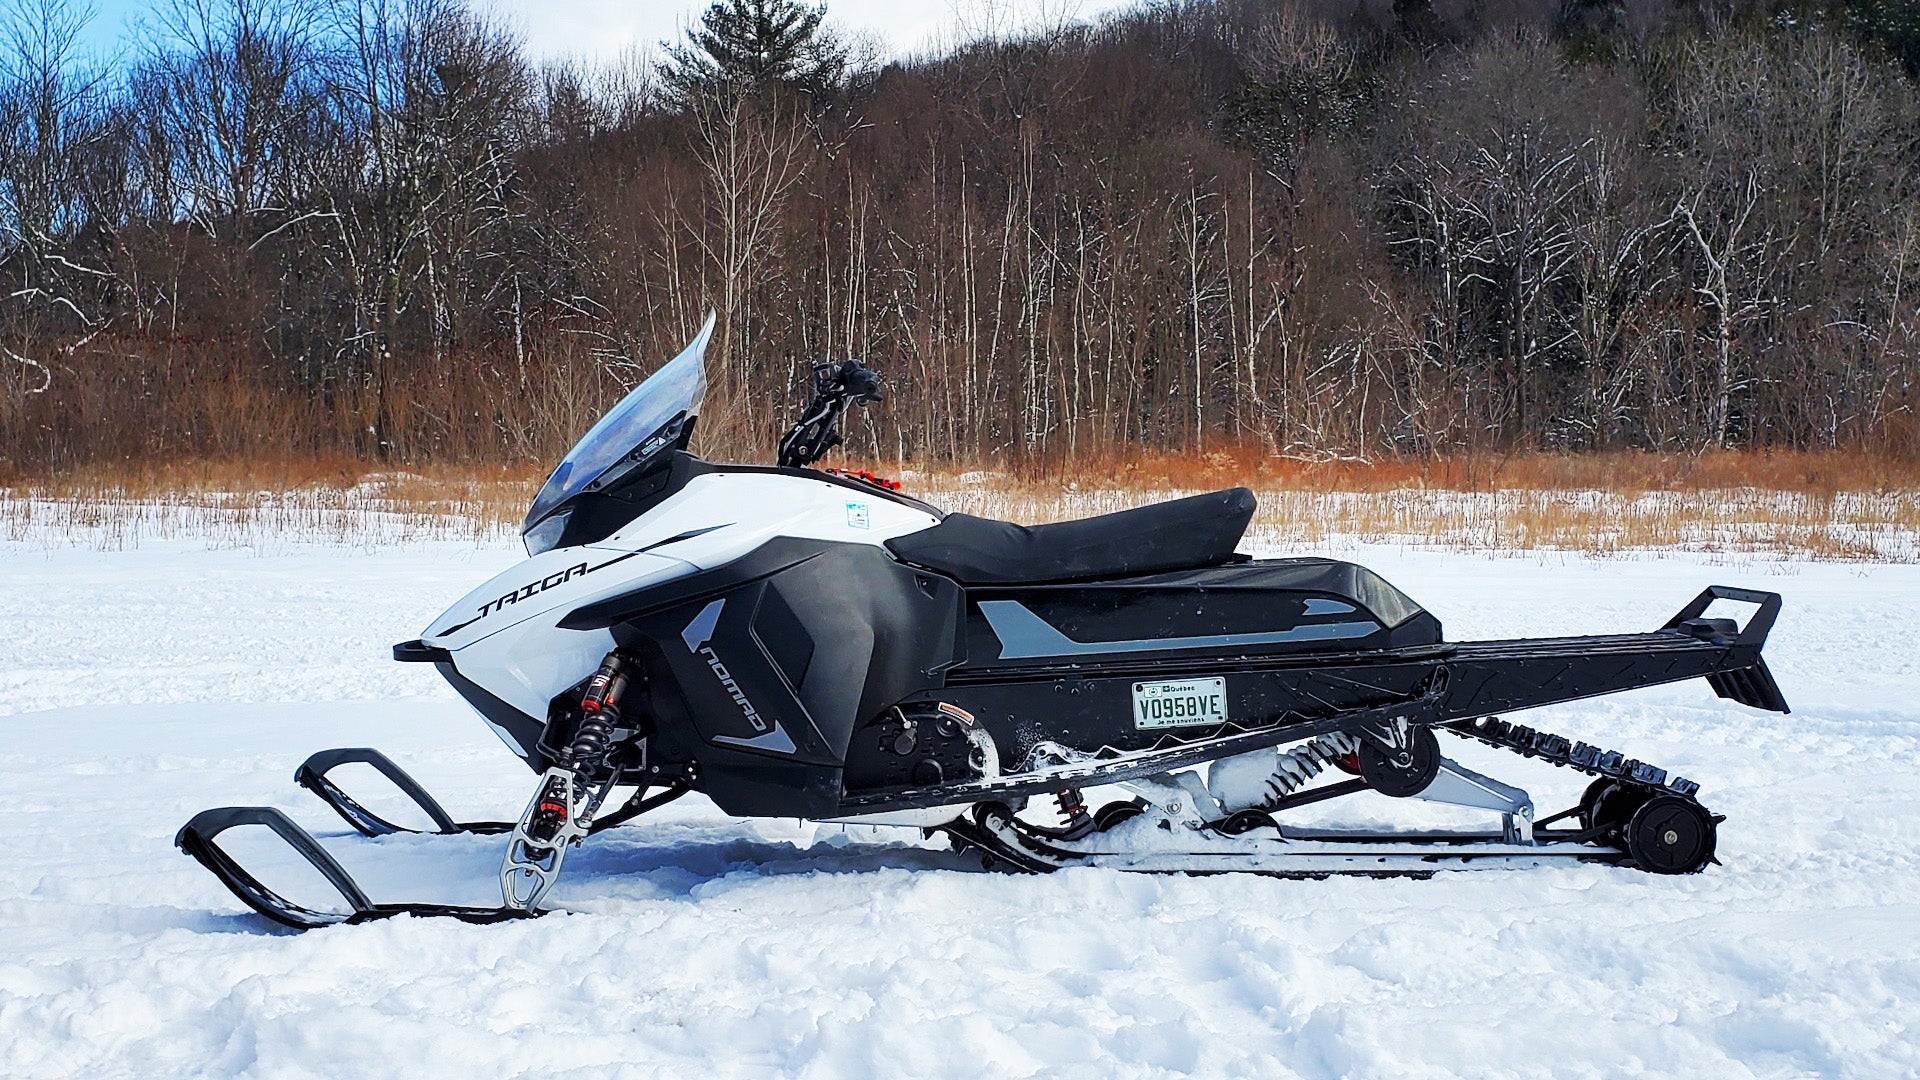 Driving an Electric Snowmobile Is a Blast, but Range Could Be a Dealbreaker